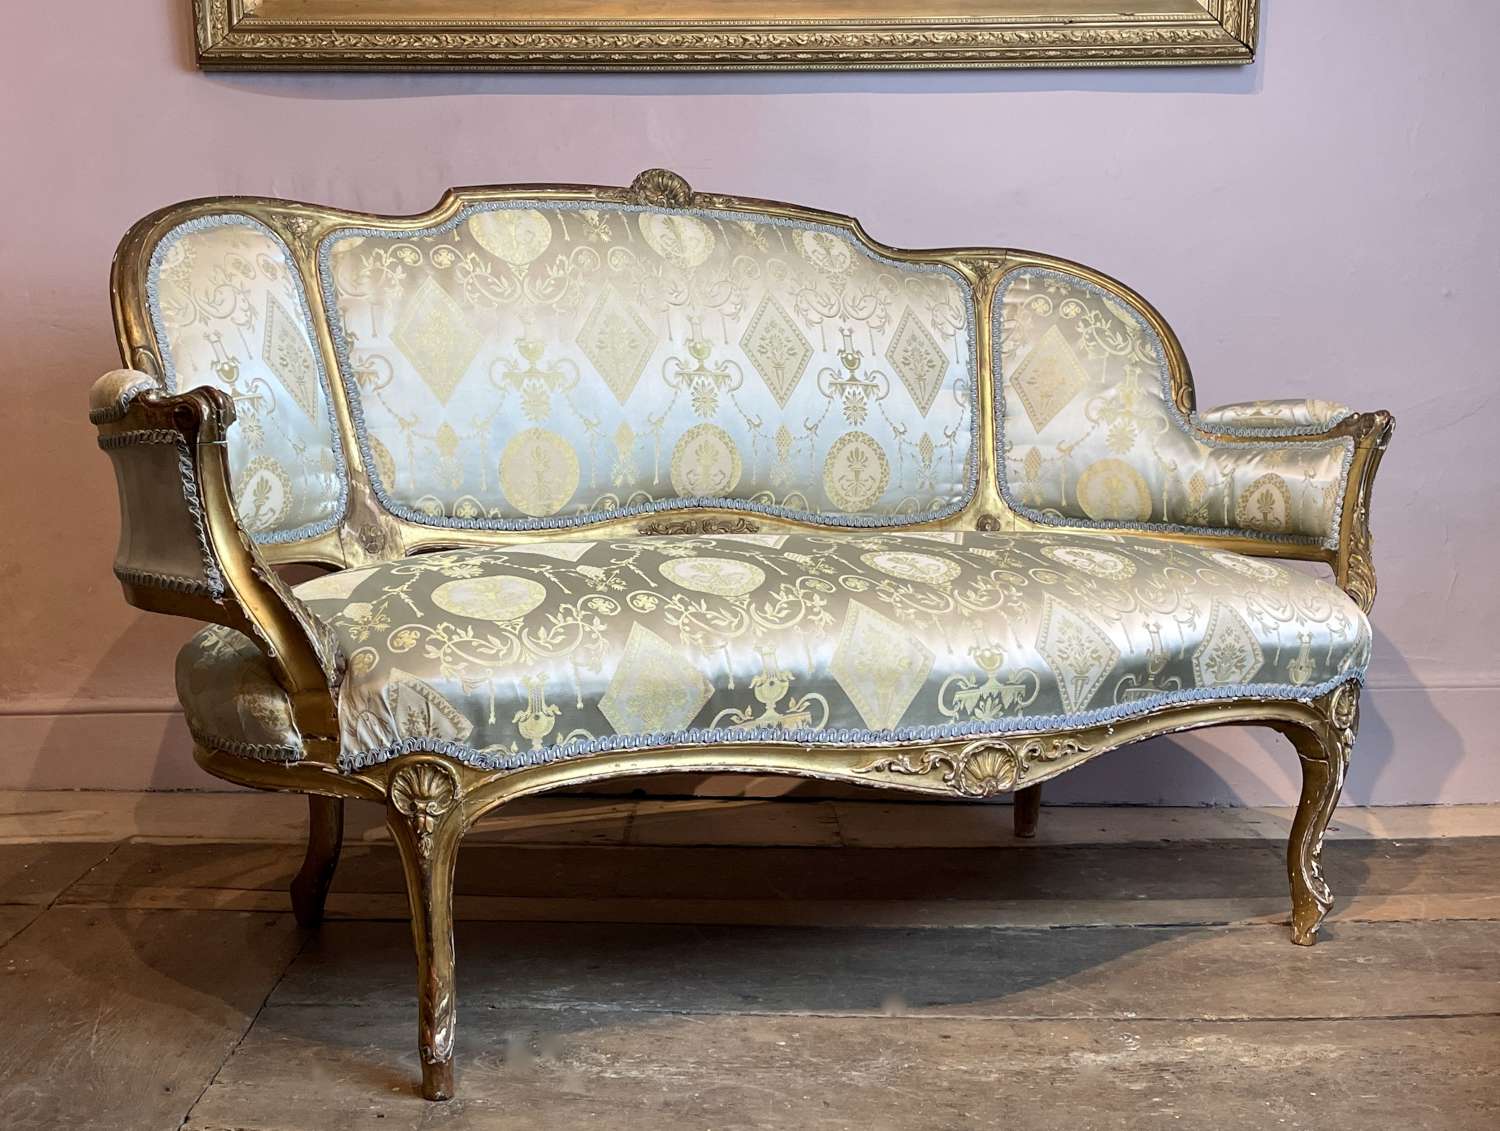 Antique French Louis XV Revival Giltwood Canape Sofa